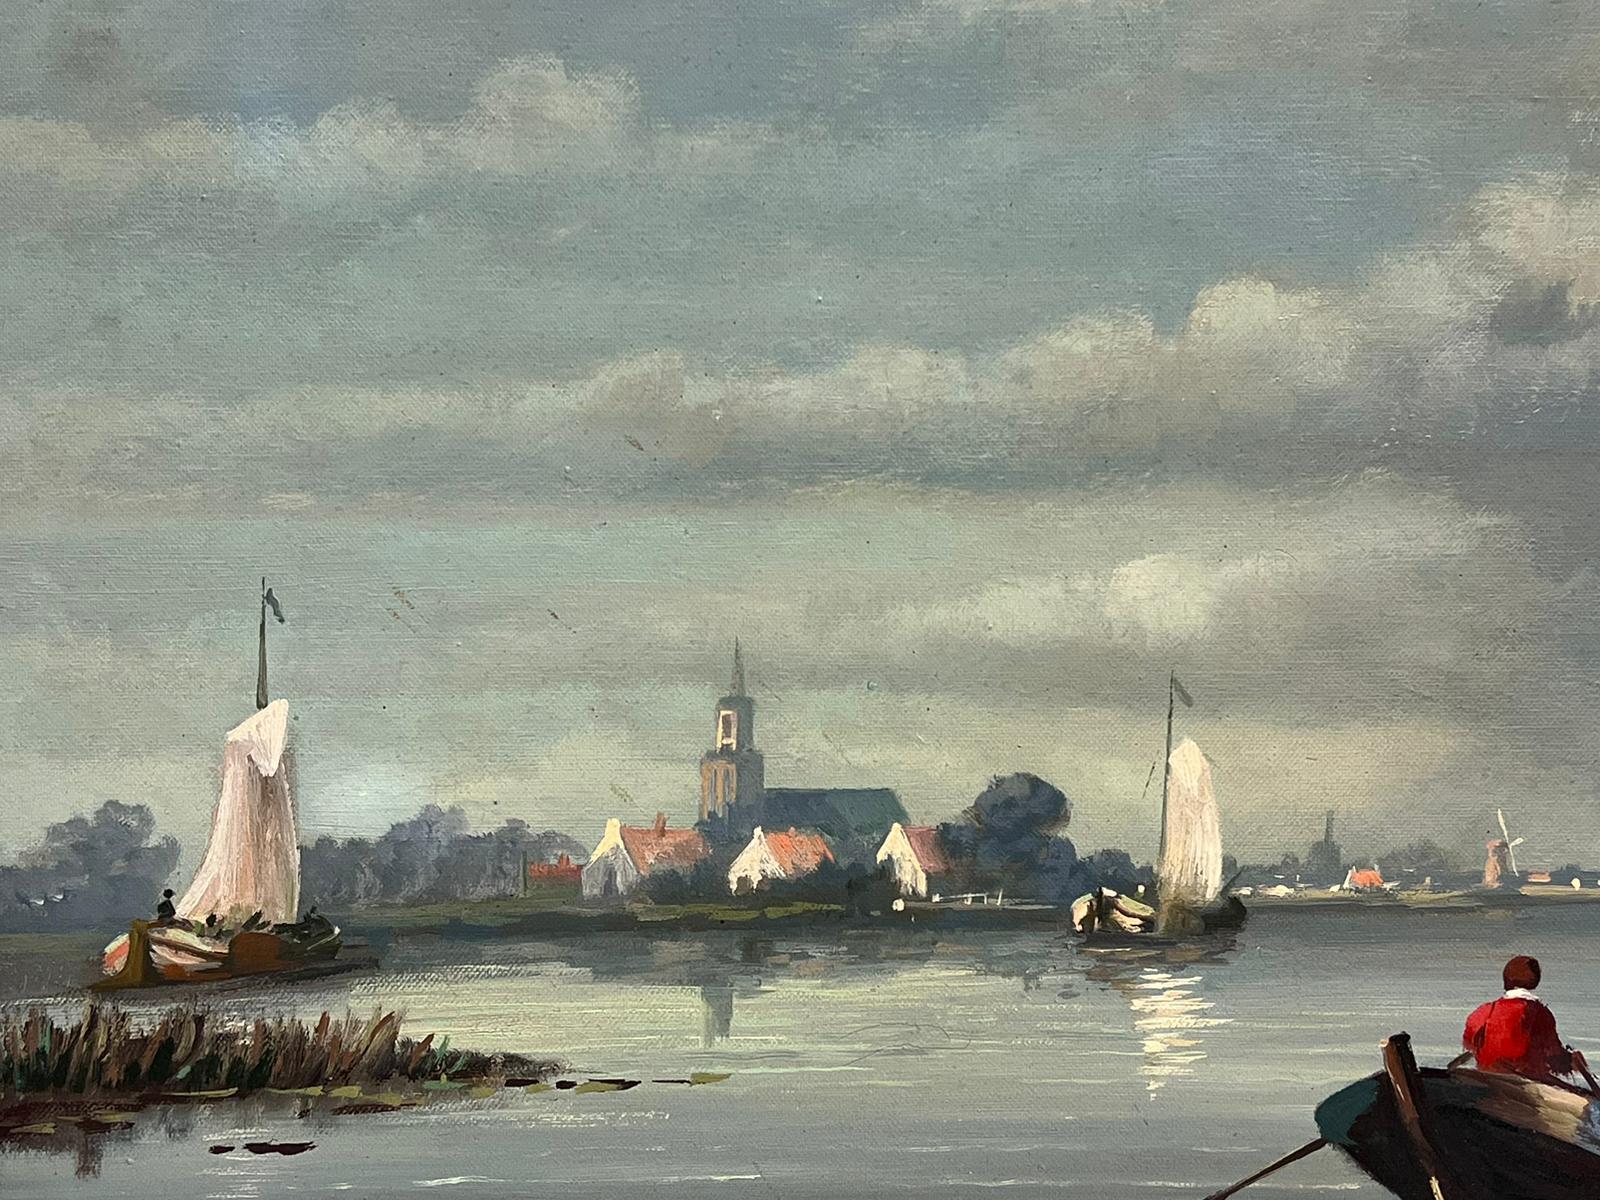 Landscape in Holland (titled verso)
Dutch School, 20th century
signed oil painting on canvas, framed
framed: 30 x 42 inches
canvas: 24 x 36 inches
provenance: private collection, England
condition: very good and sound condition; please note due to